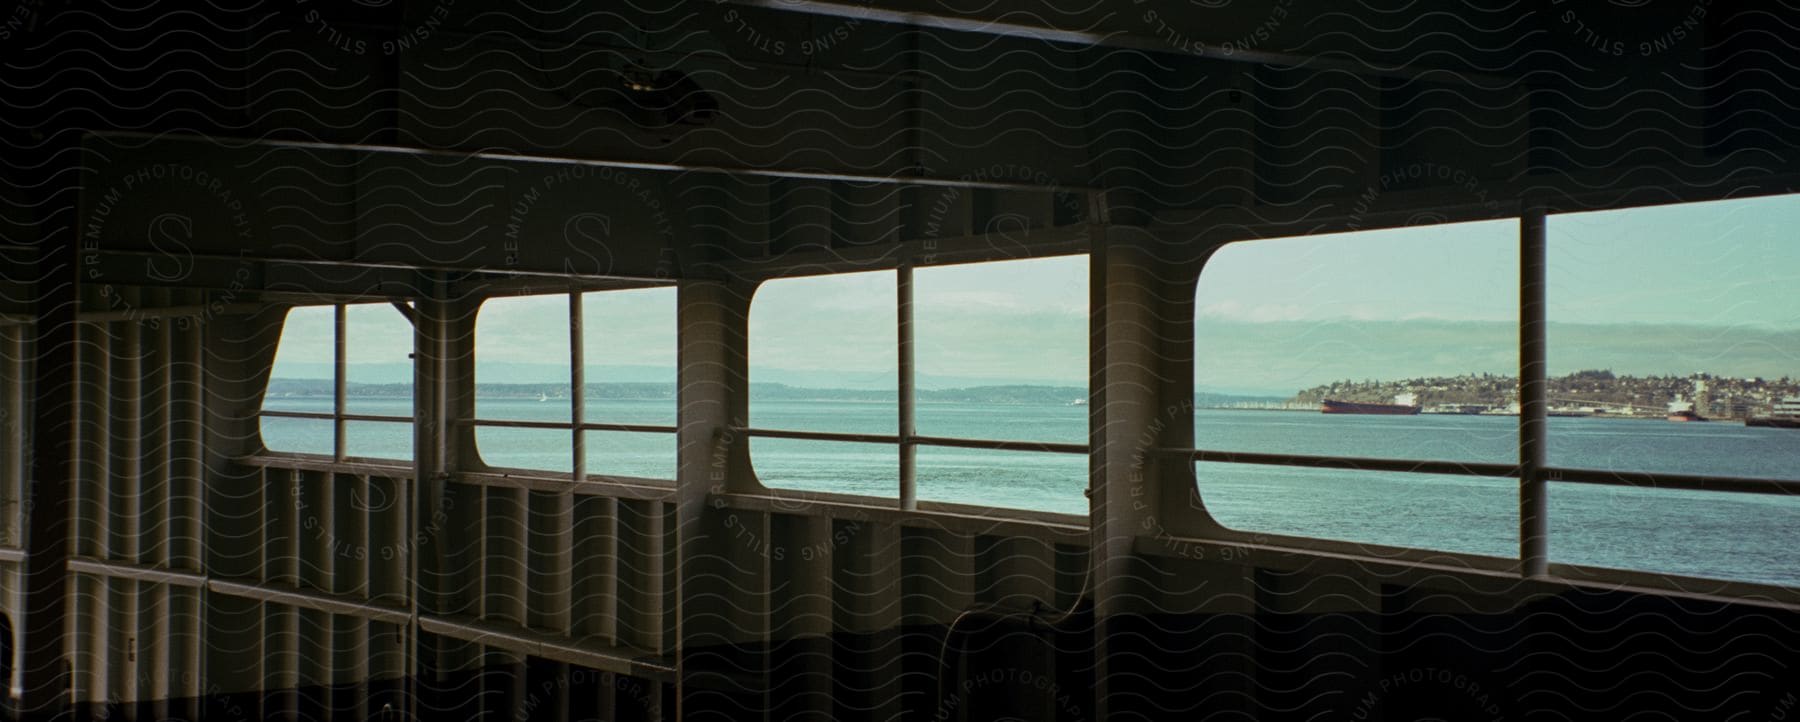 Inside view of a ship with windows overlooking water shorelines and towns on the waterfront